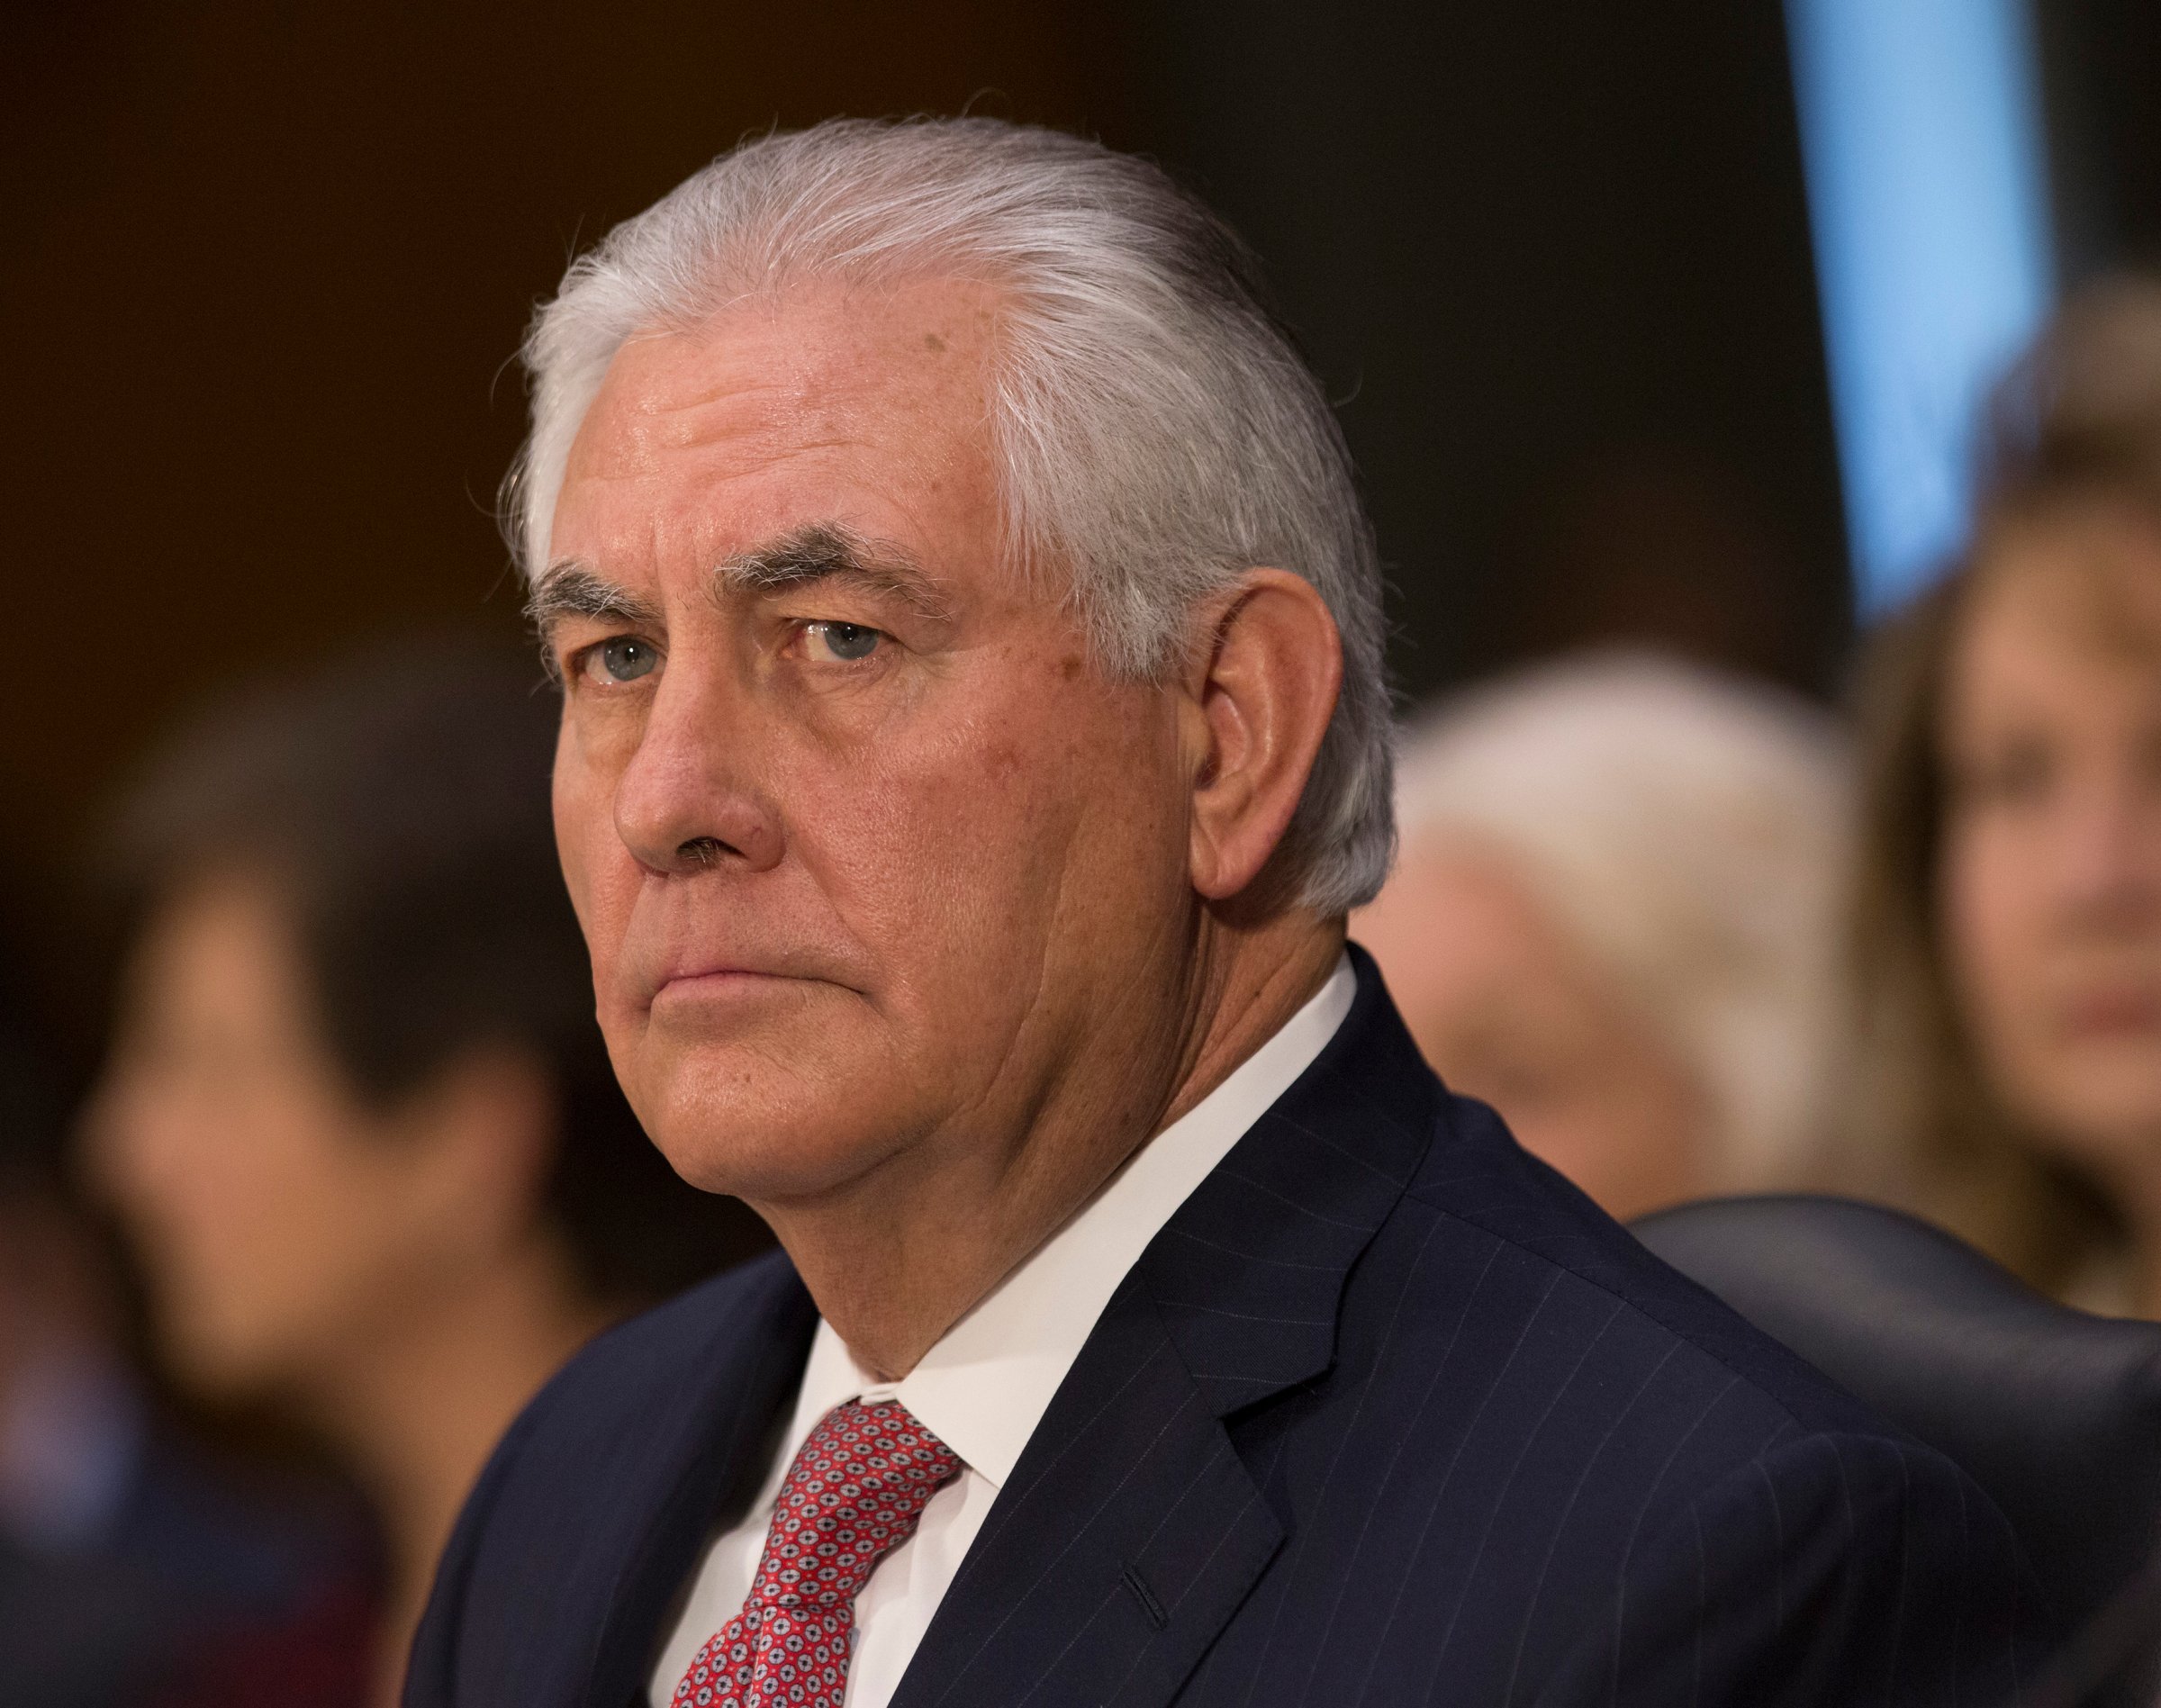 Former ExxonMobil CEO Rex Tillerson appears before the Senate Foreign Relations Committee for his confirmation hearing to be US Secretary of State on Capitol Hill in Washington DC, January 11, 2017.